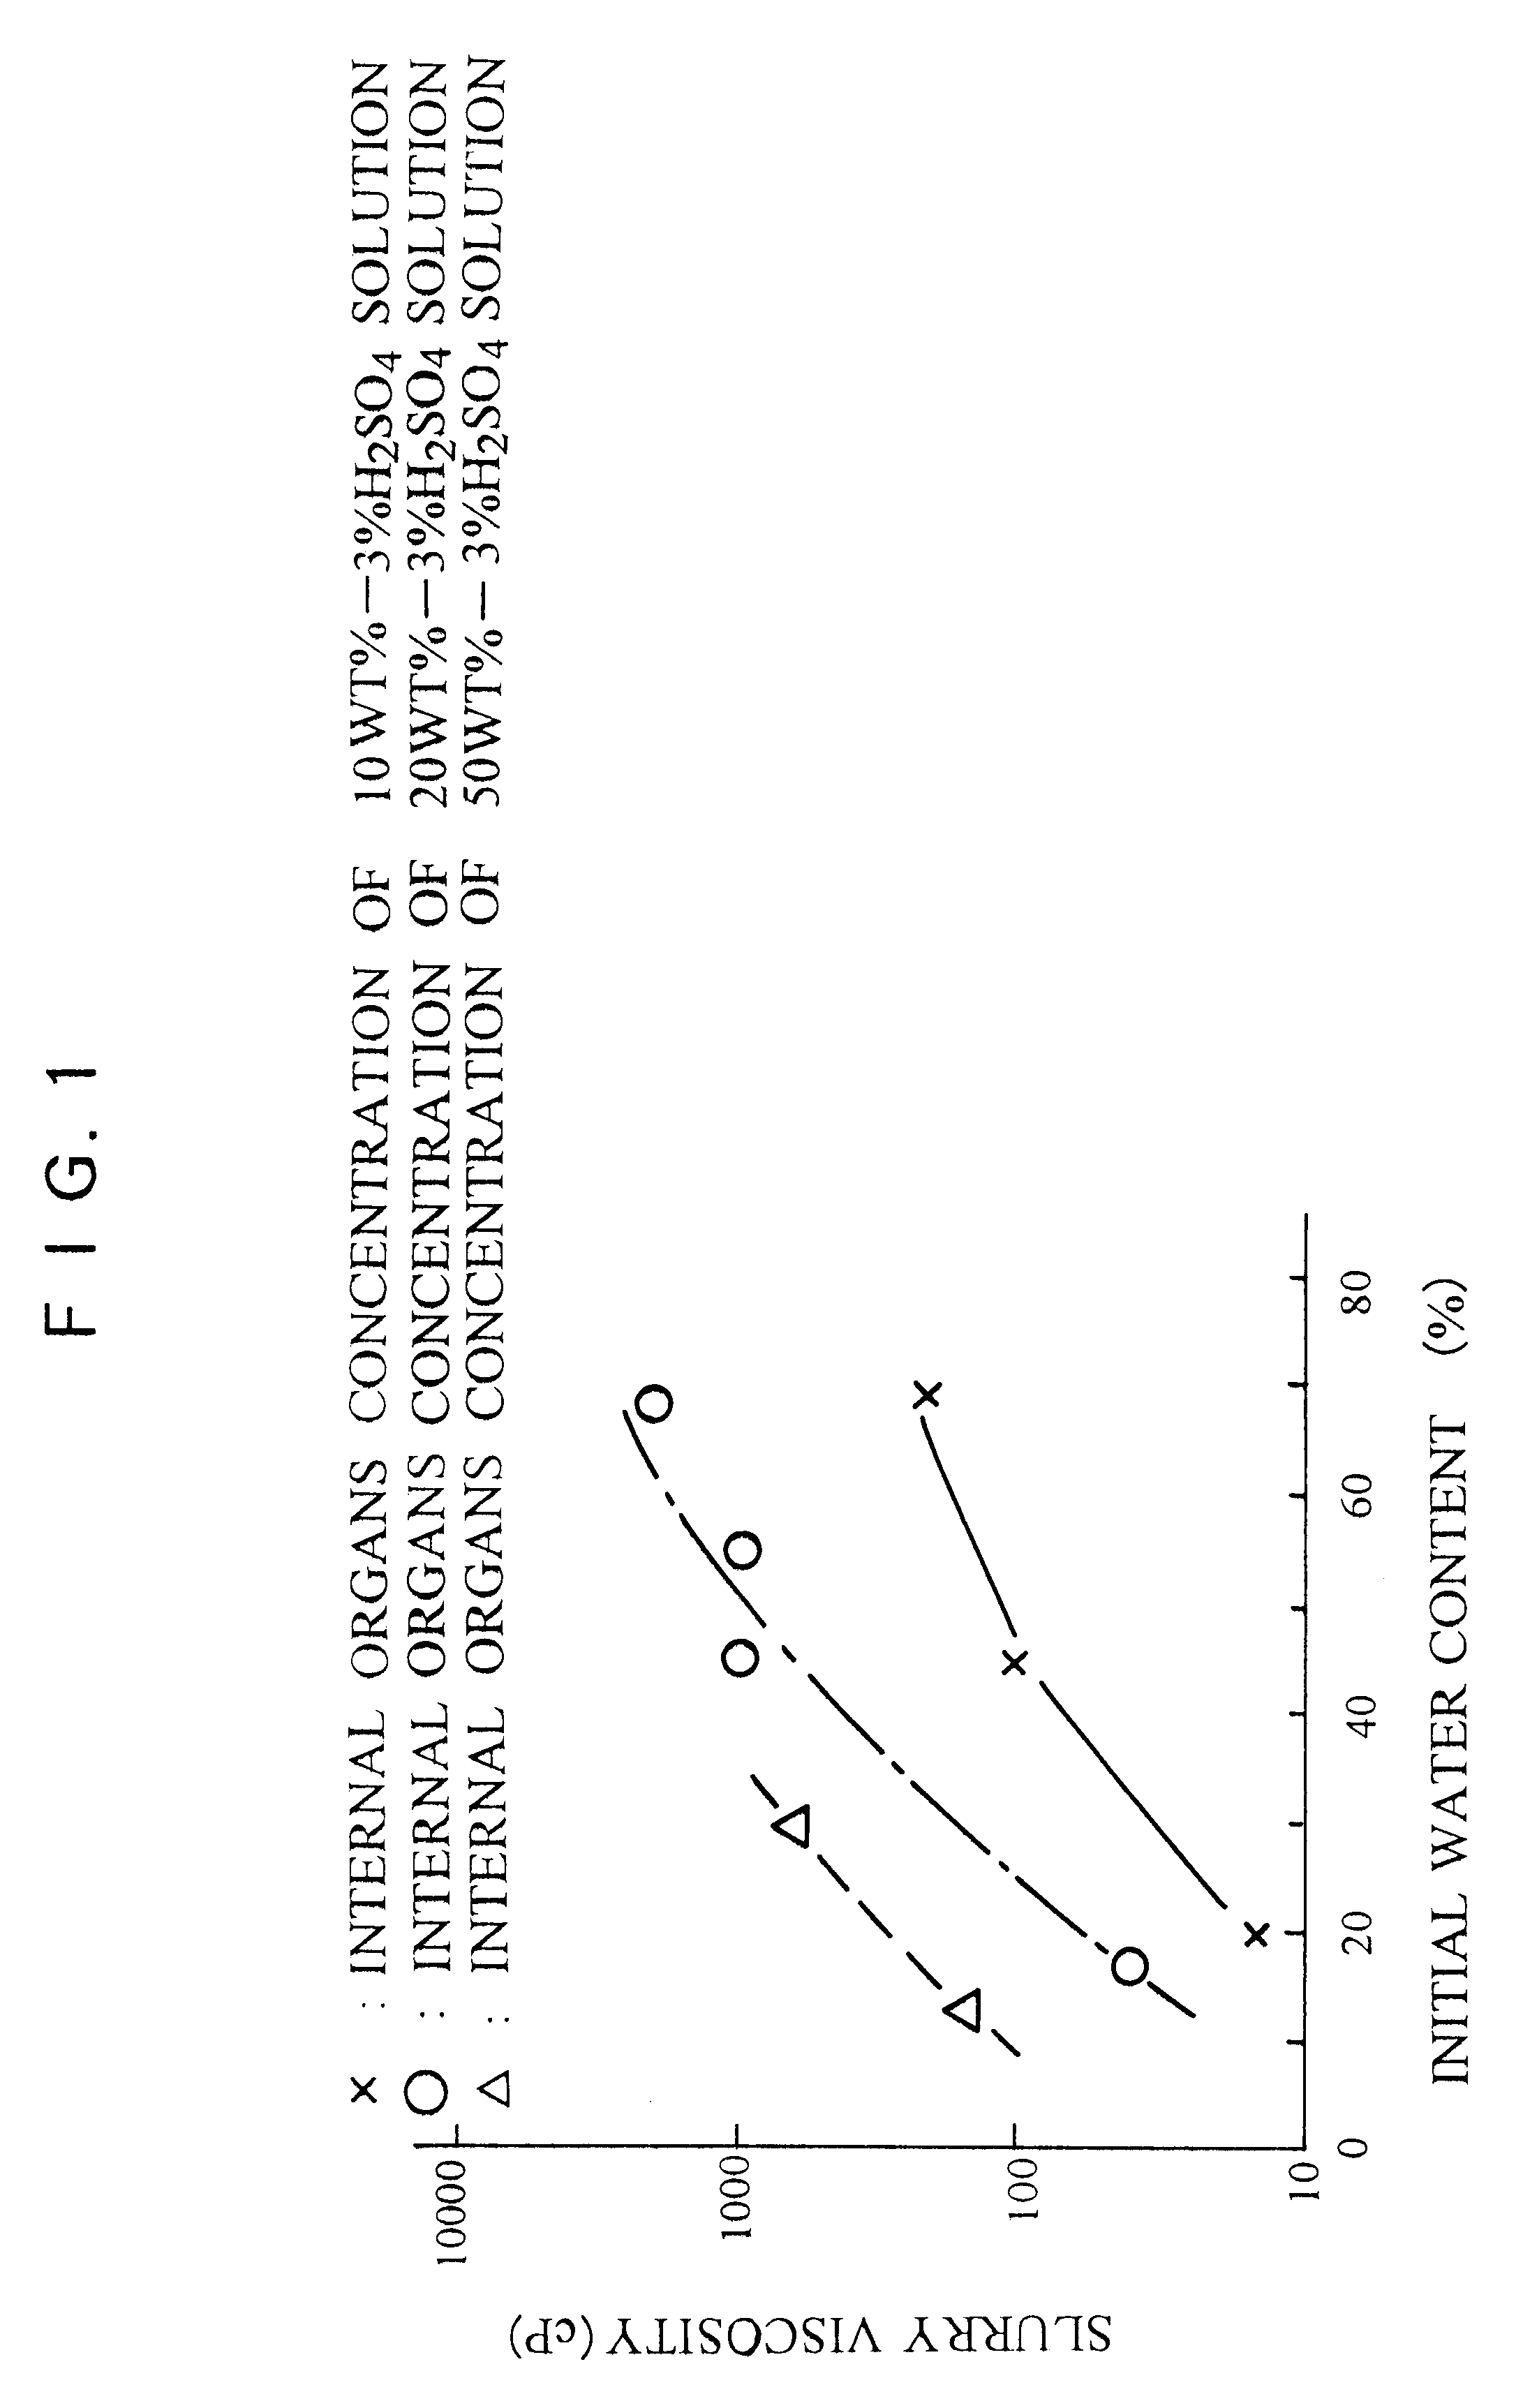 Method and apparatus for removing toxic substances from waste marine products